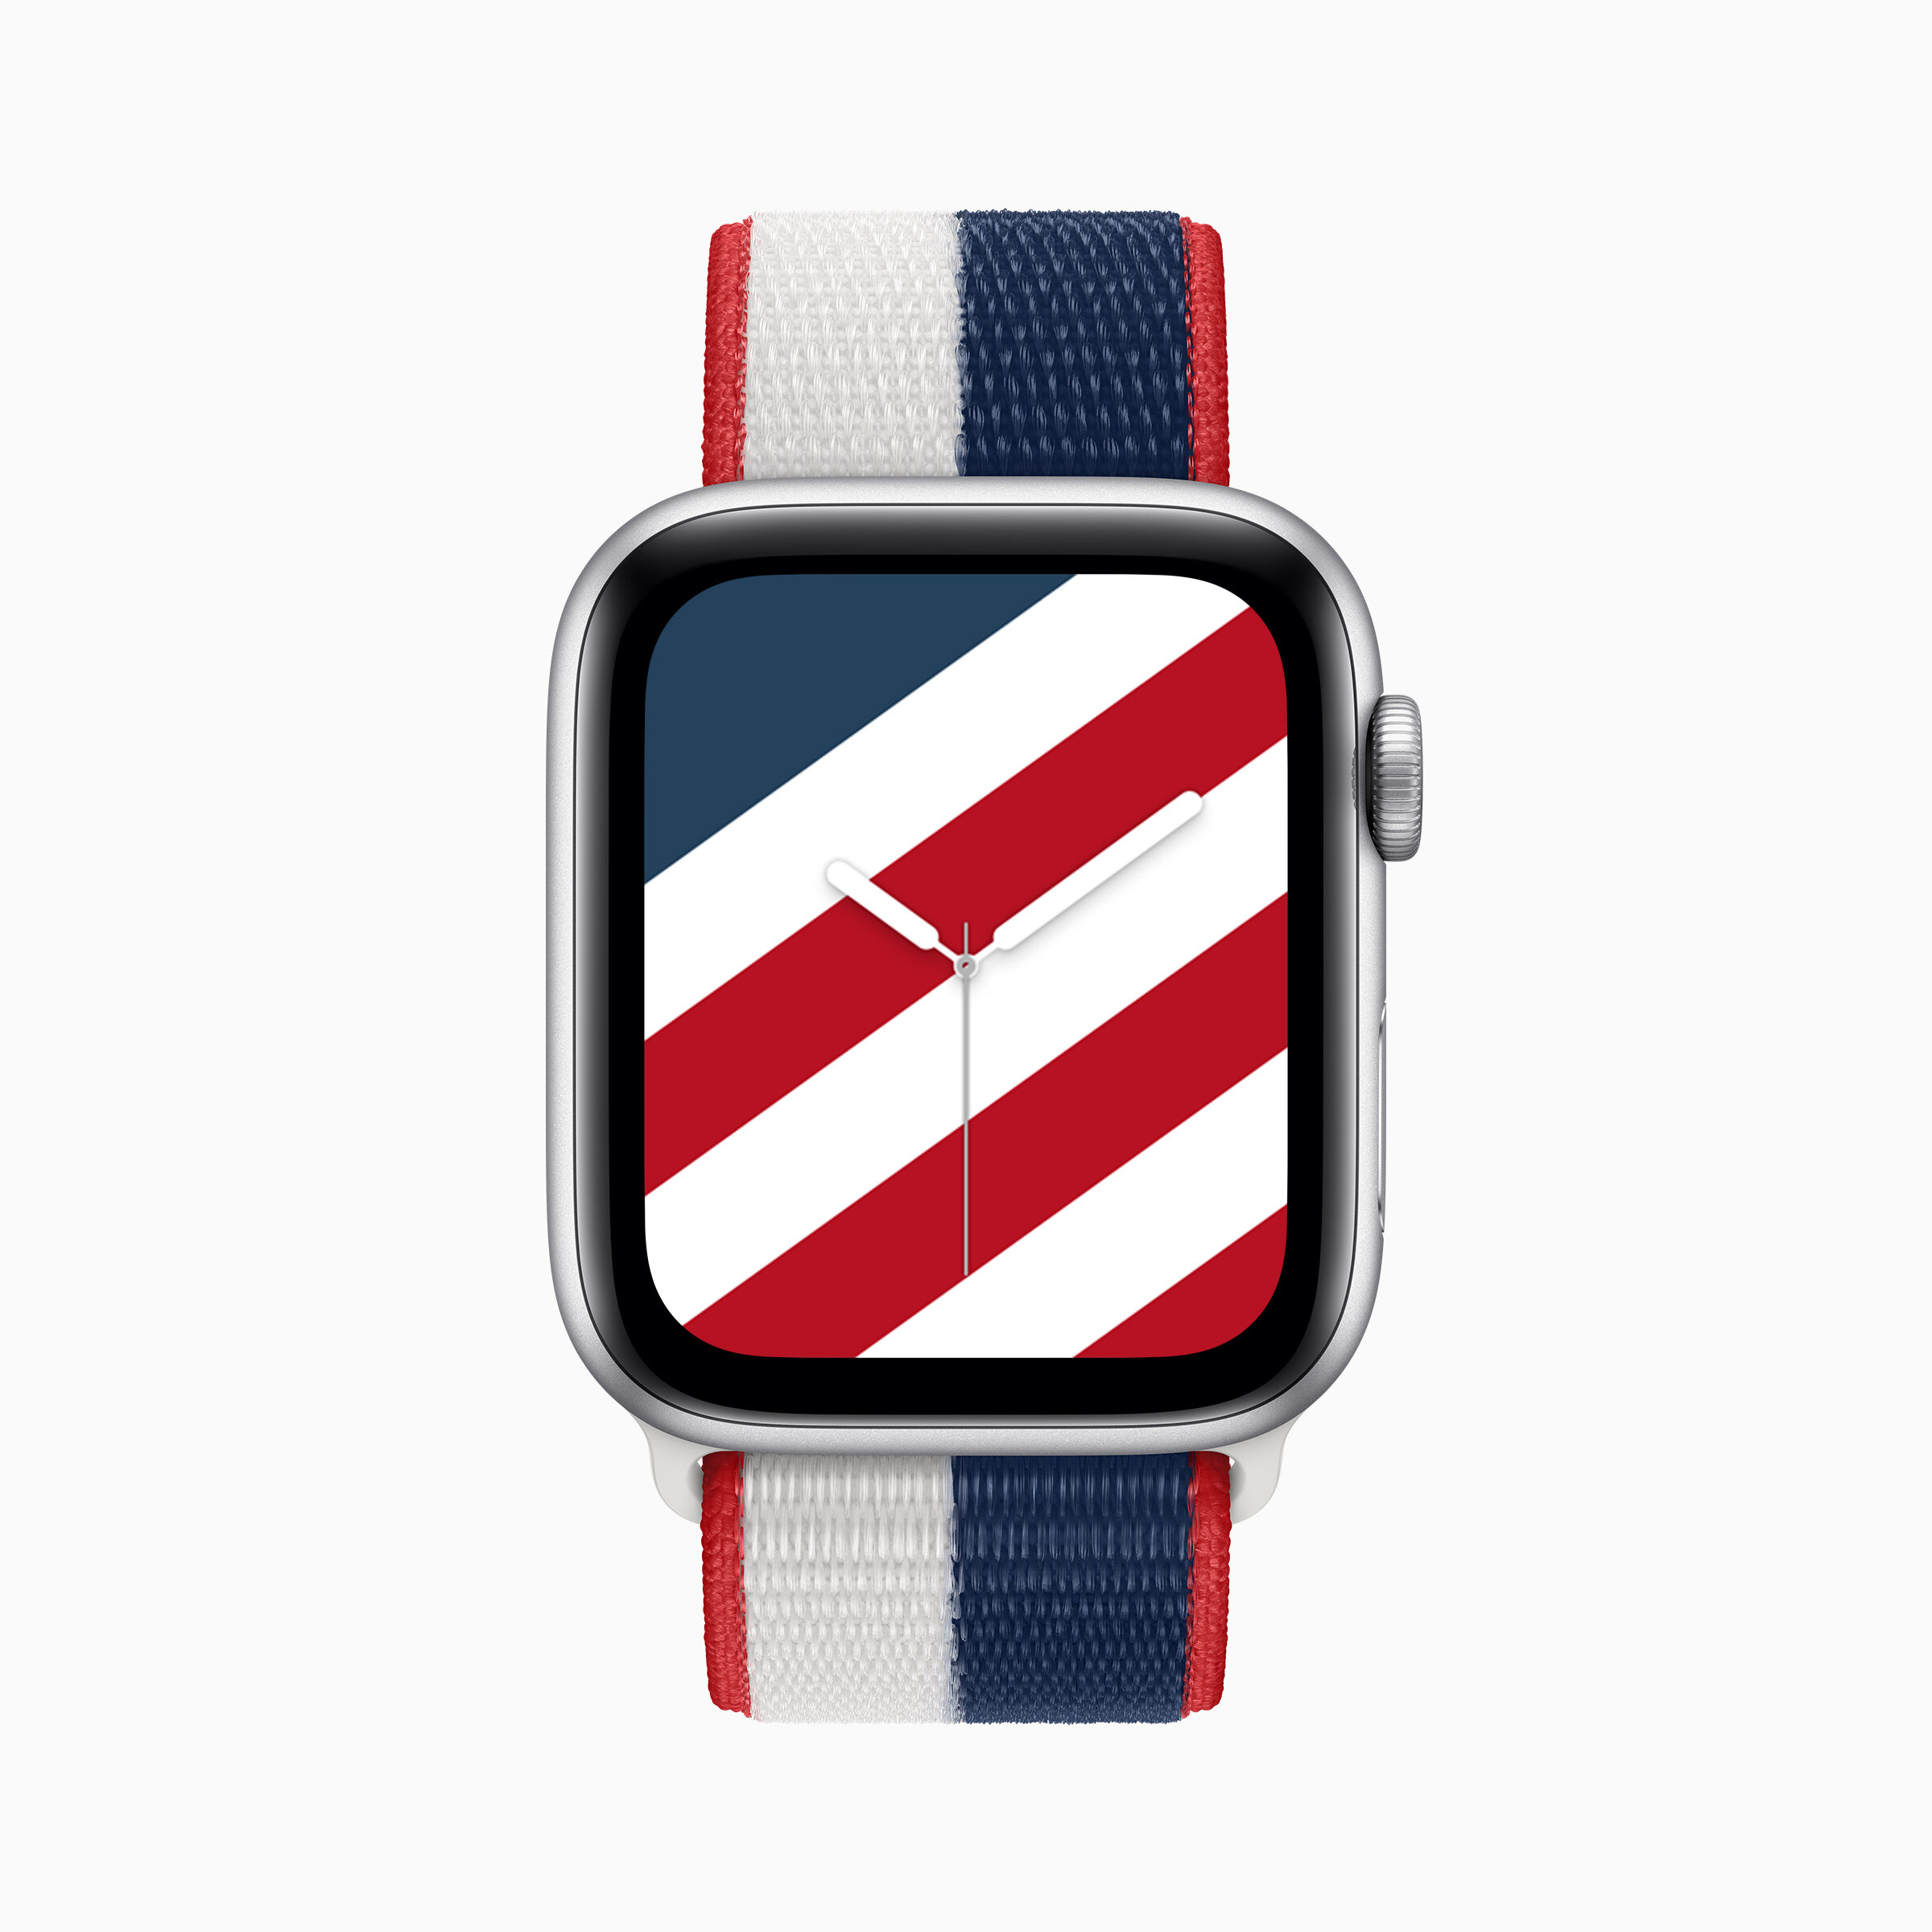 Download the new International Collection Apple Watch Faces — 9 Tech Eleven